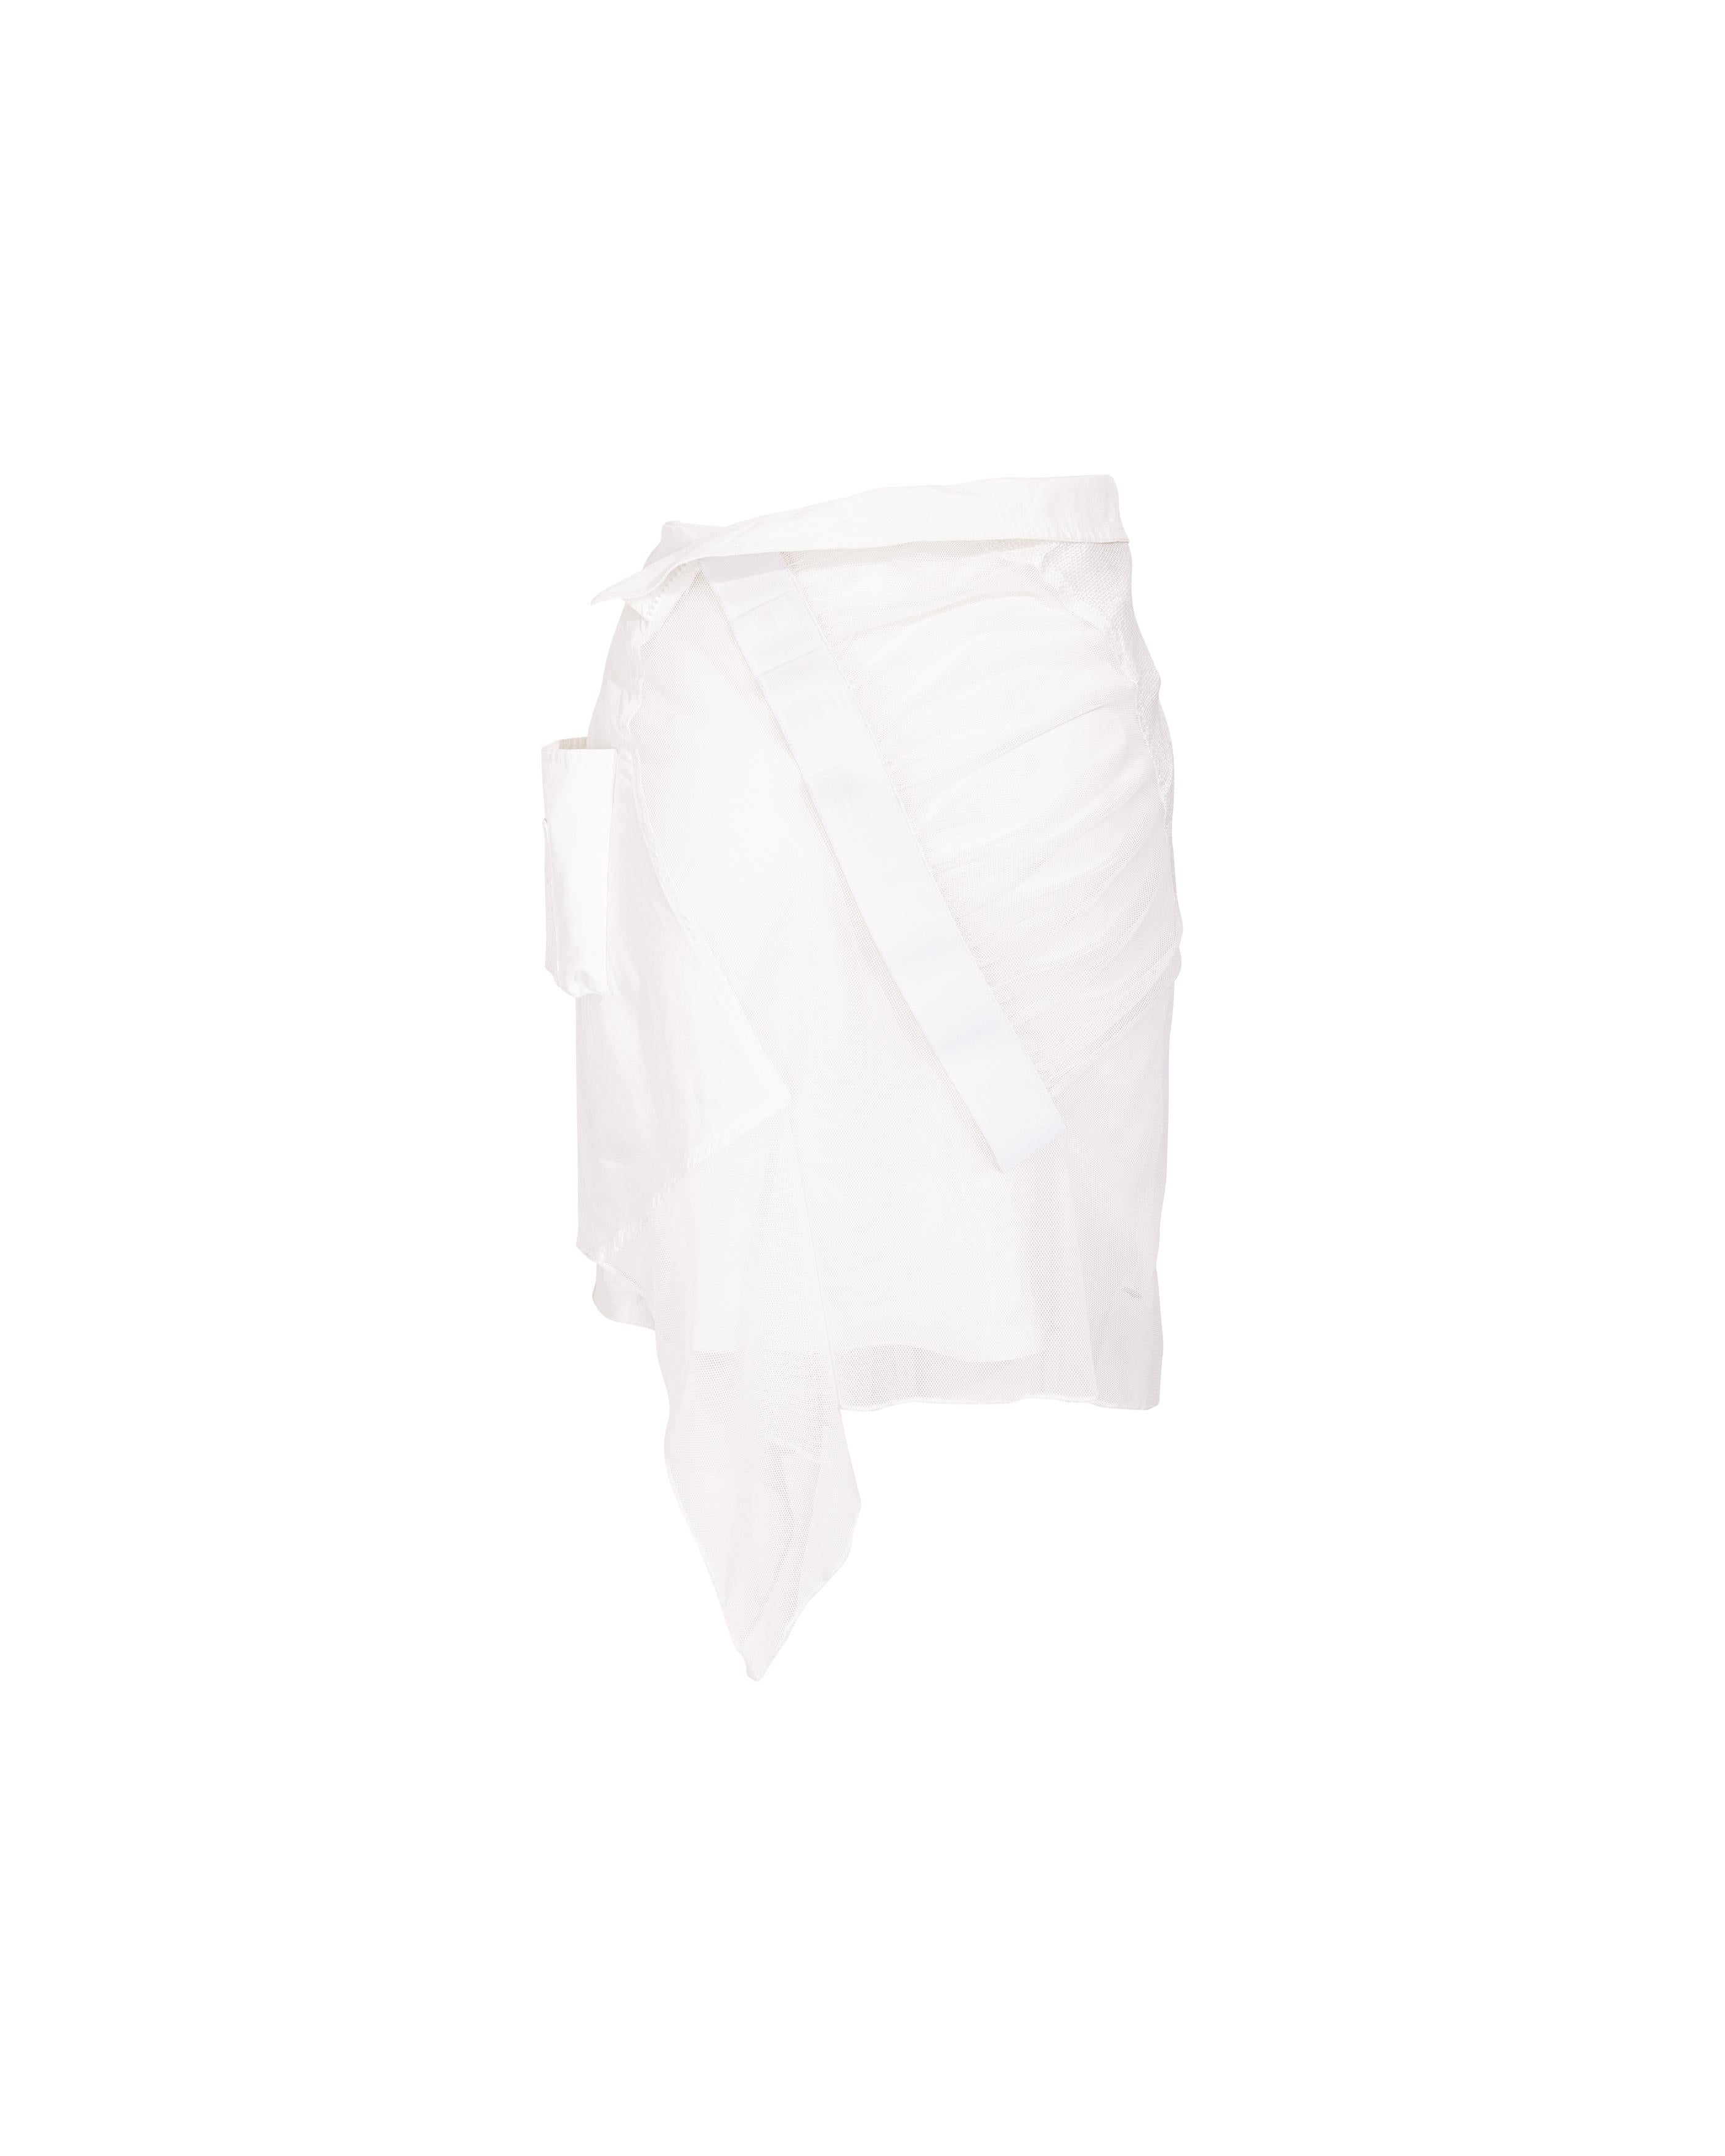 S/S 2002 Christian Dior by John Galliano White Asymmetrical Deconstructed Skirt 1